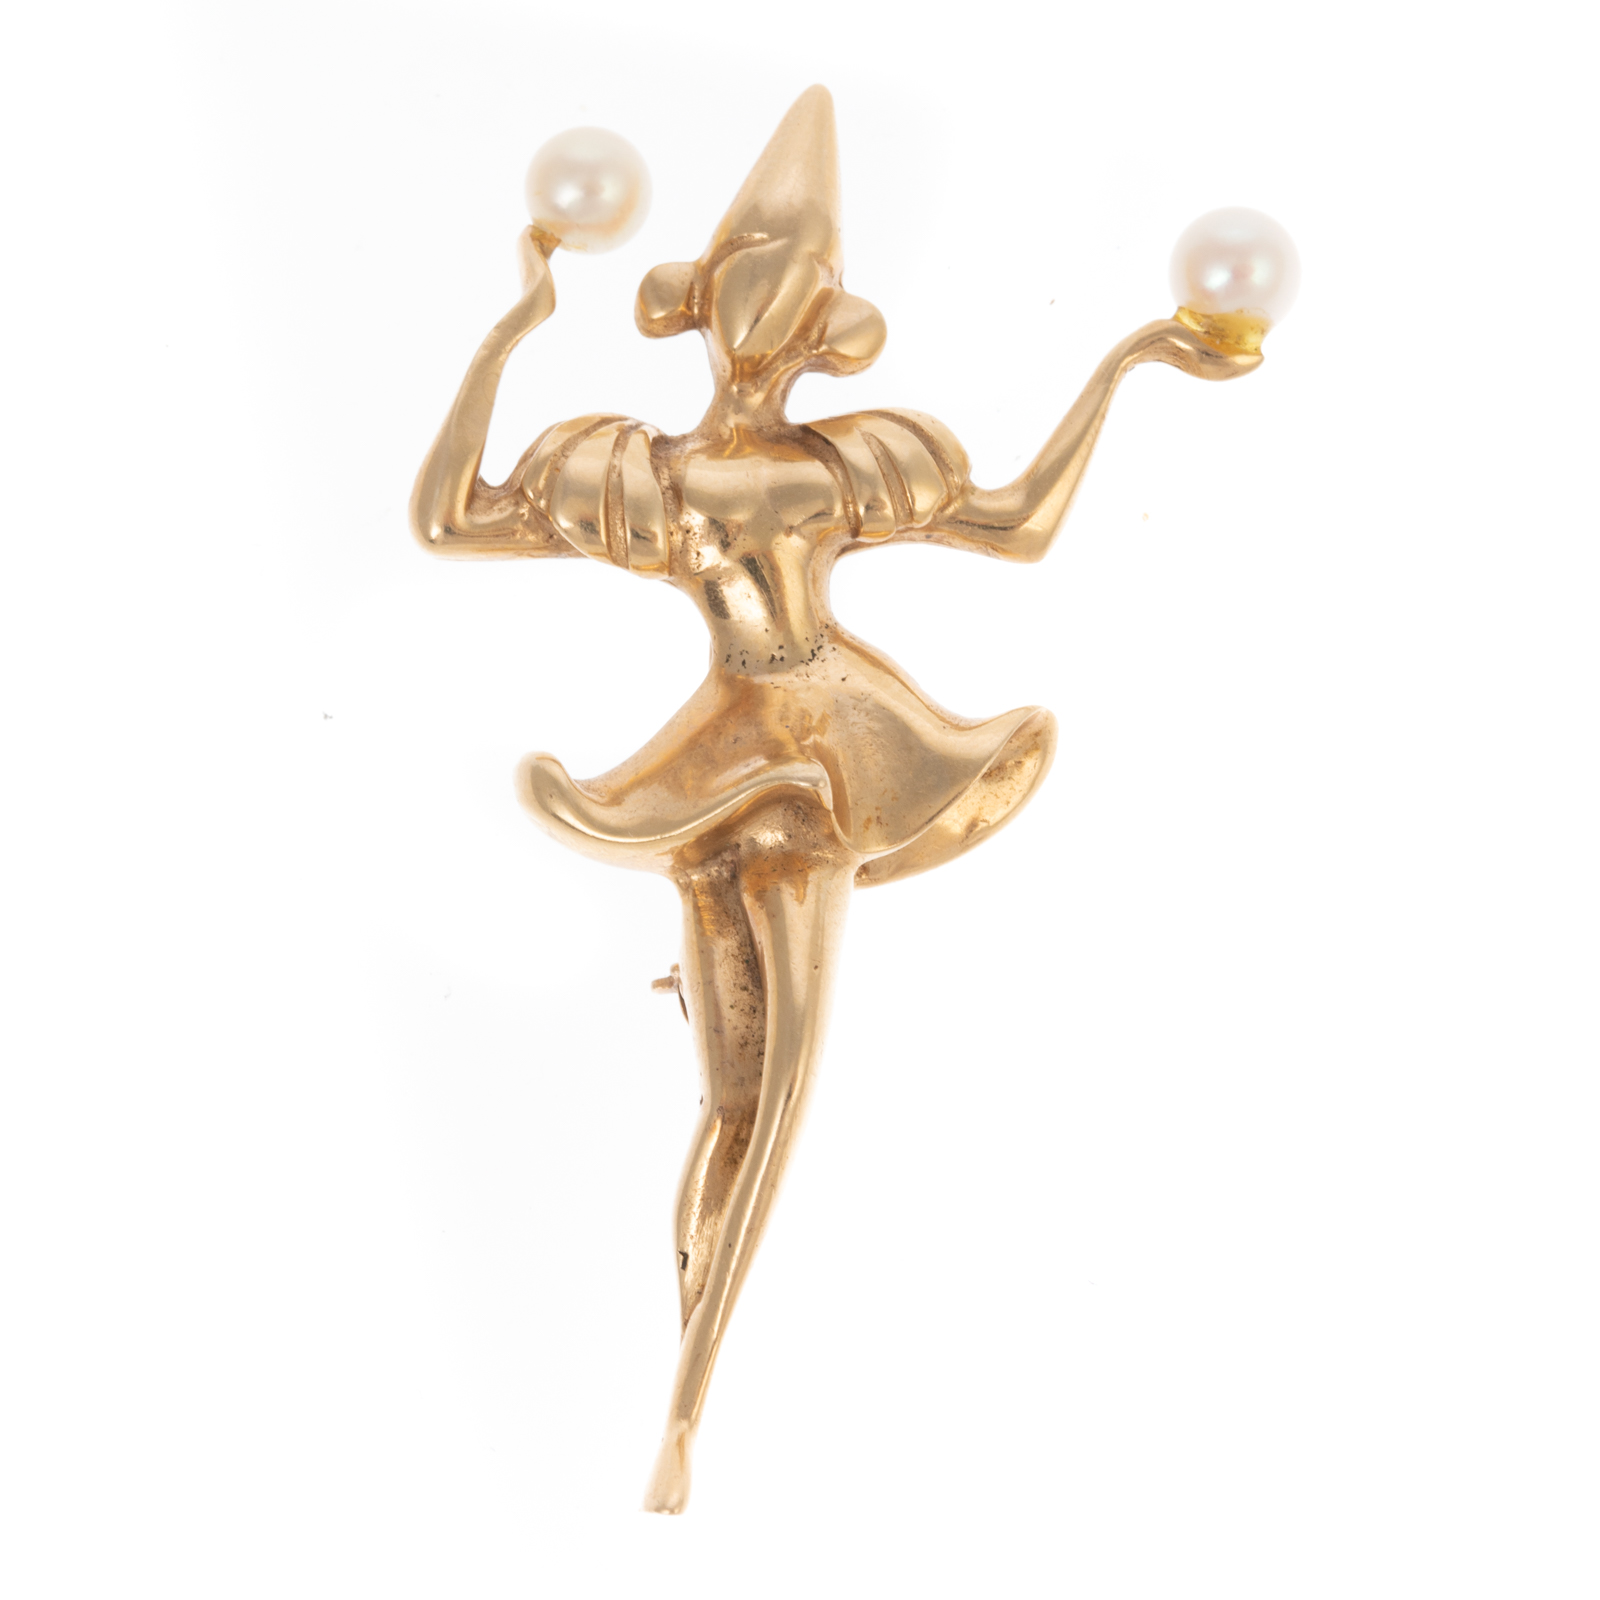 A 14K YELLOW GOLD & PEARL DANCER